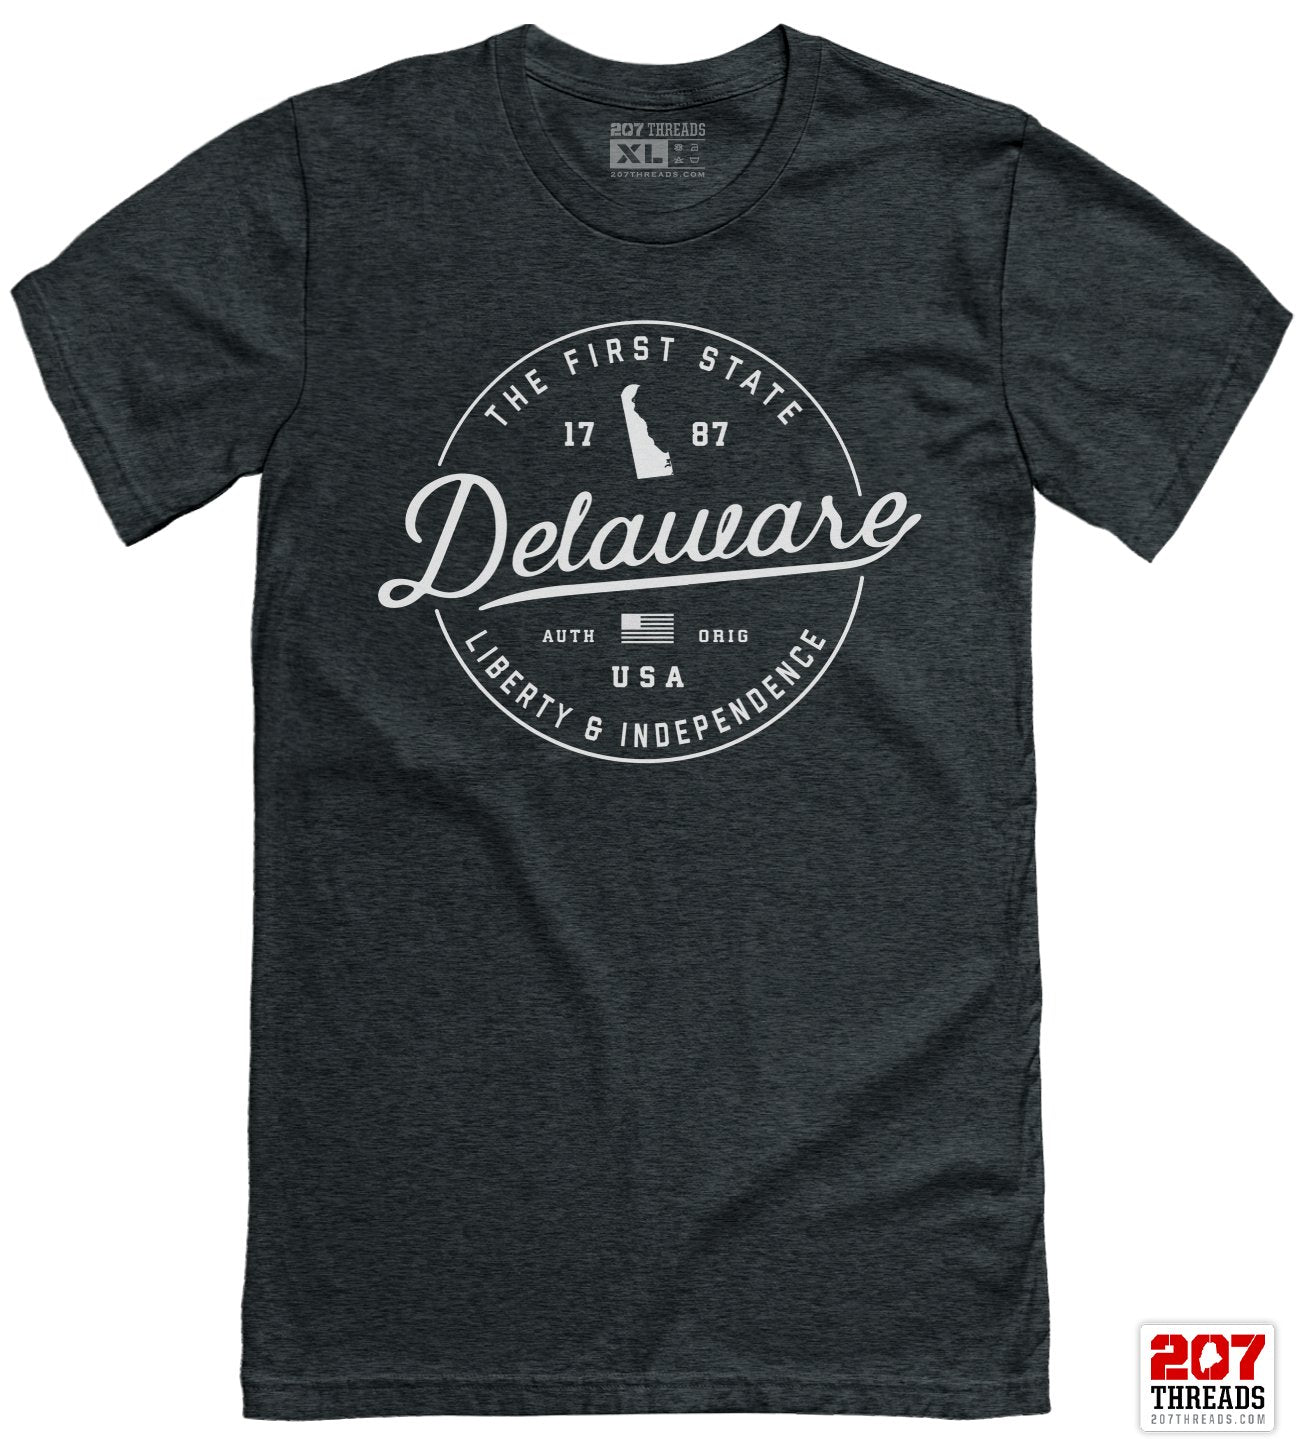 State of Delaware T-Shirt - Soft Delaware Tee